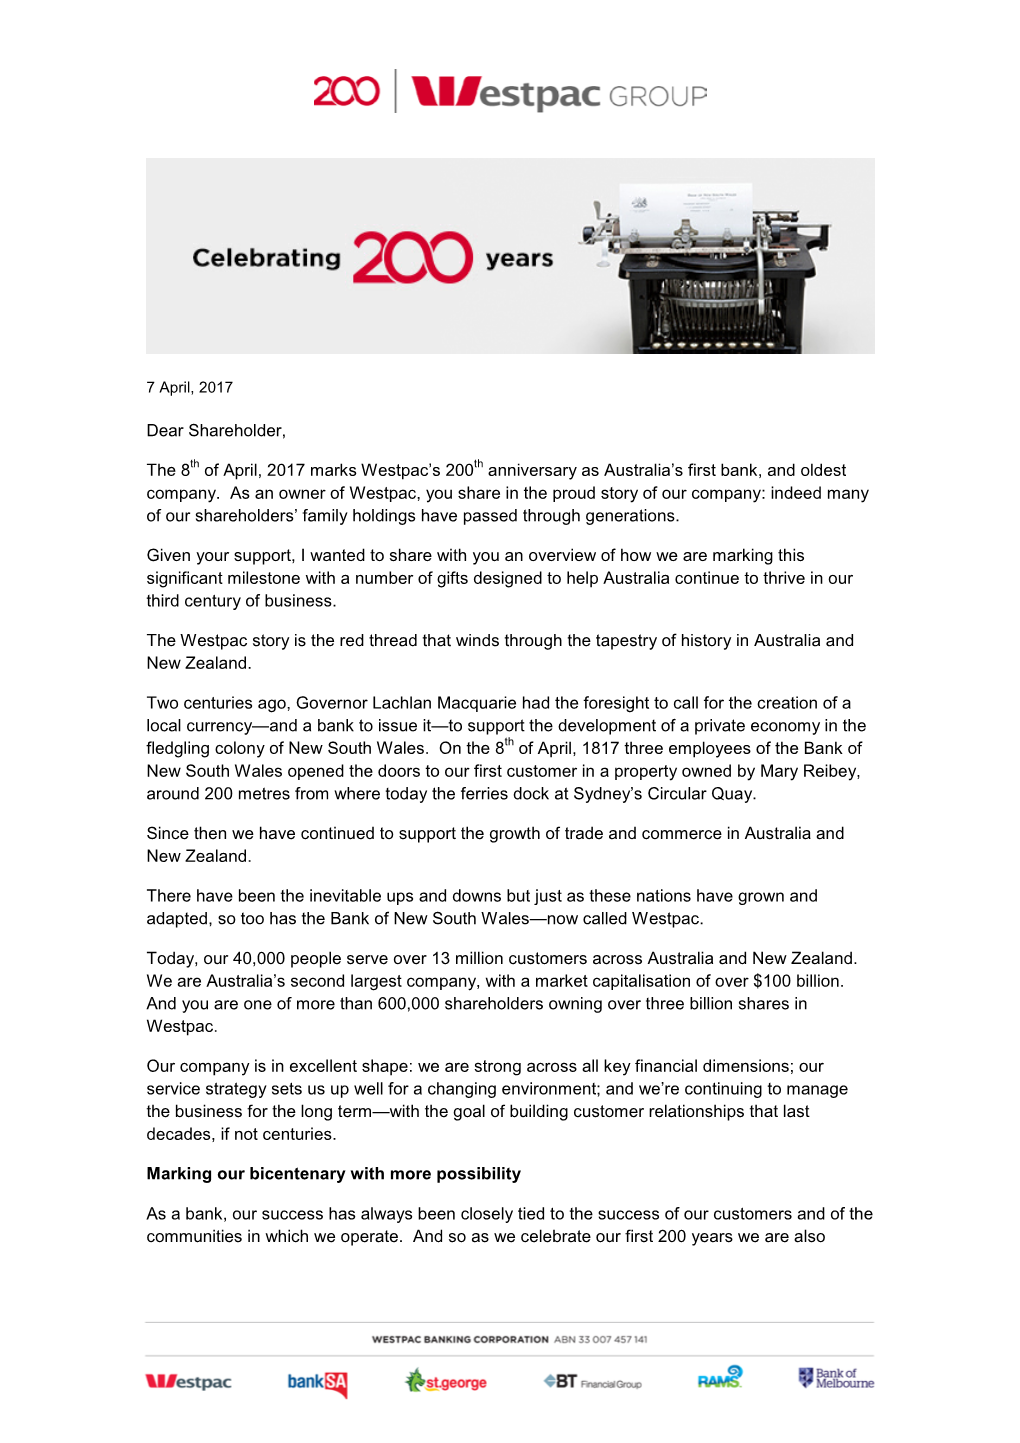 Dear Shareholder, the 8Th of April, 2017 Marks Westpac's 200Th